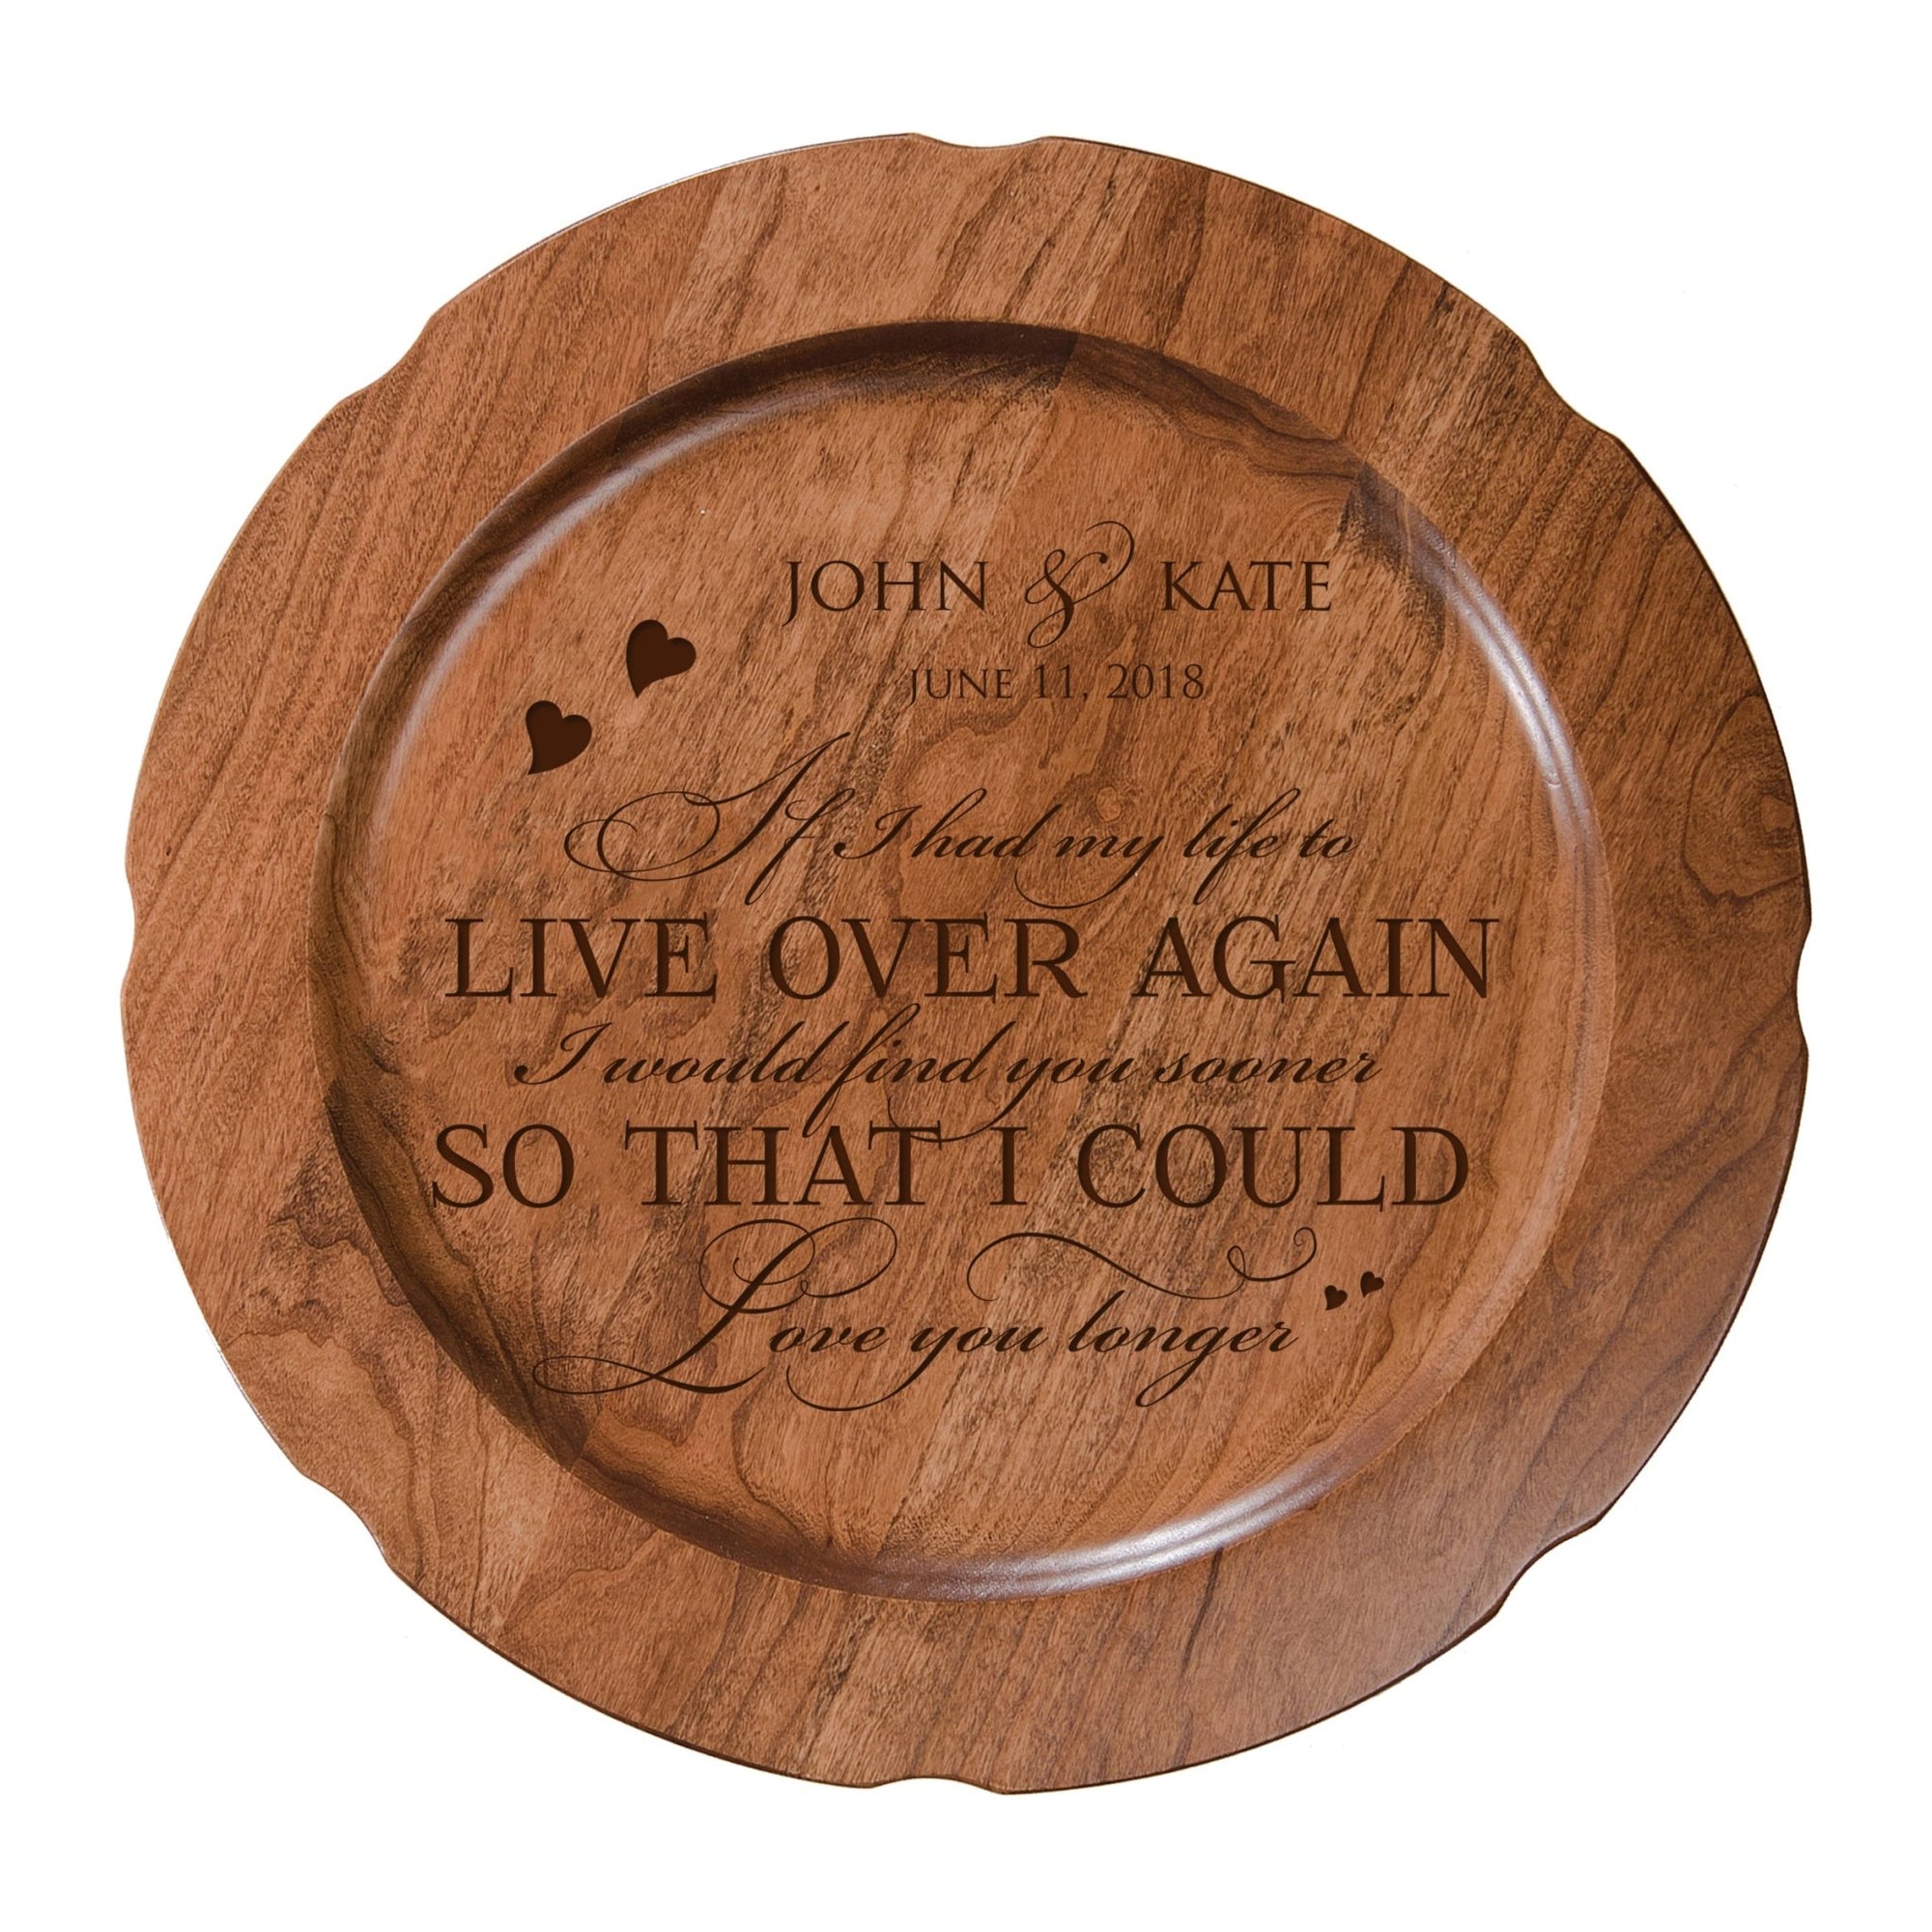 Personalized Inspirational Plates With Quotes - Live Over Again - LifeSong Milestones